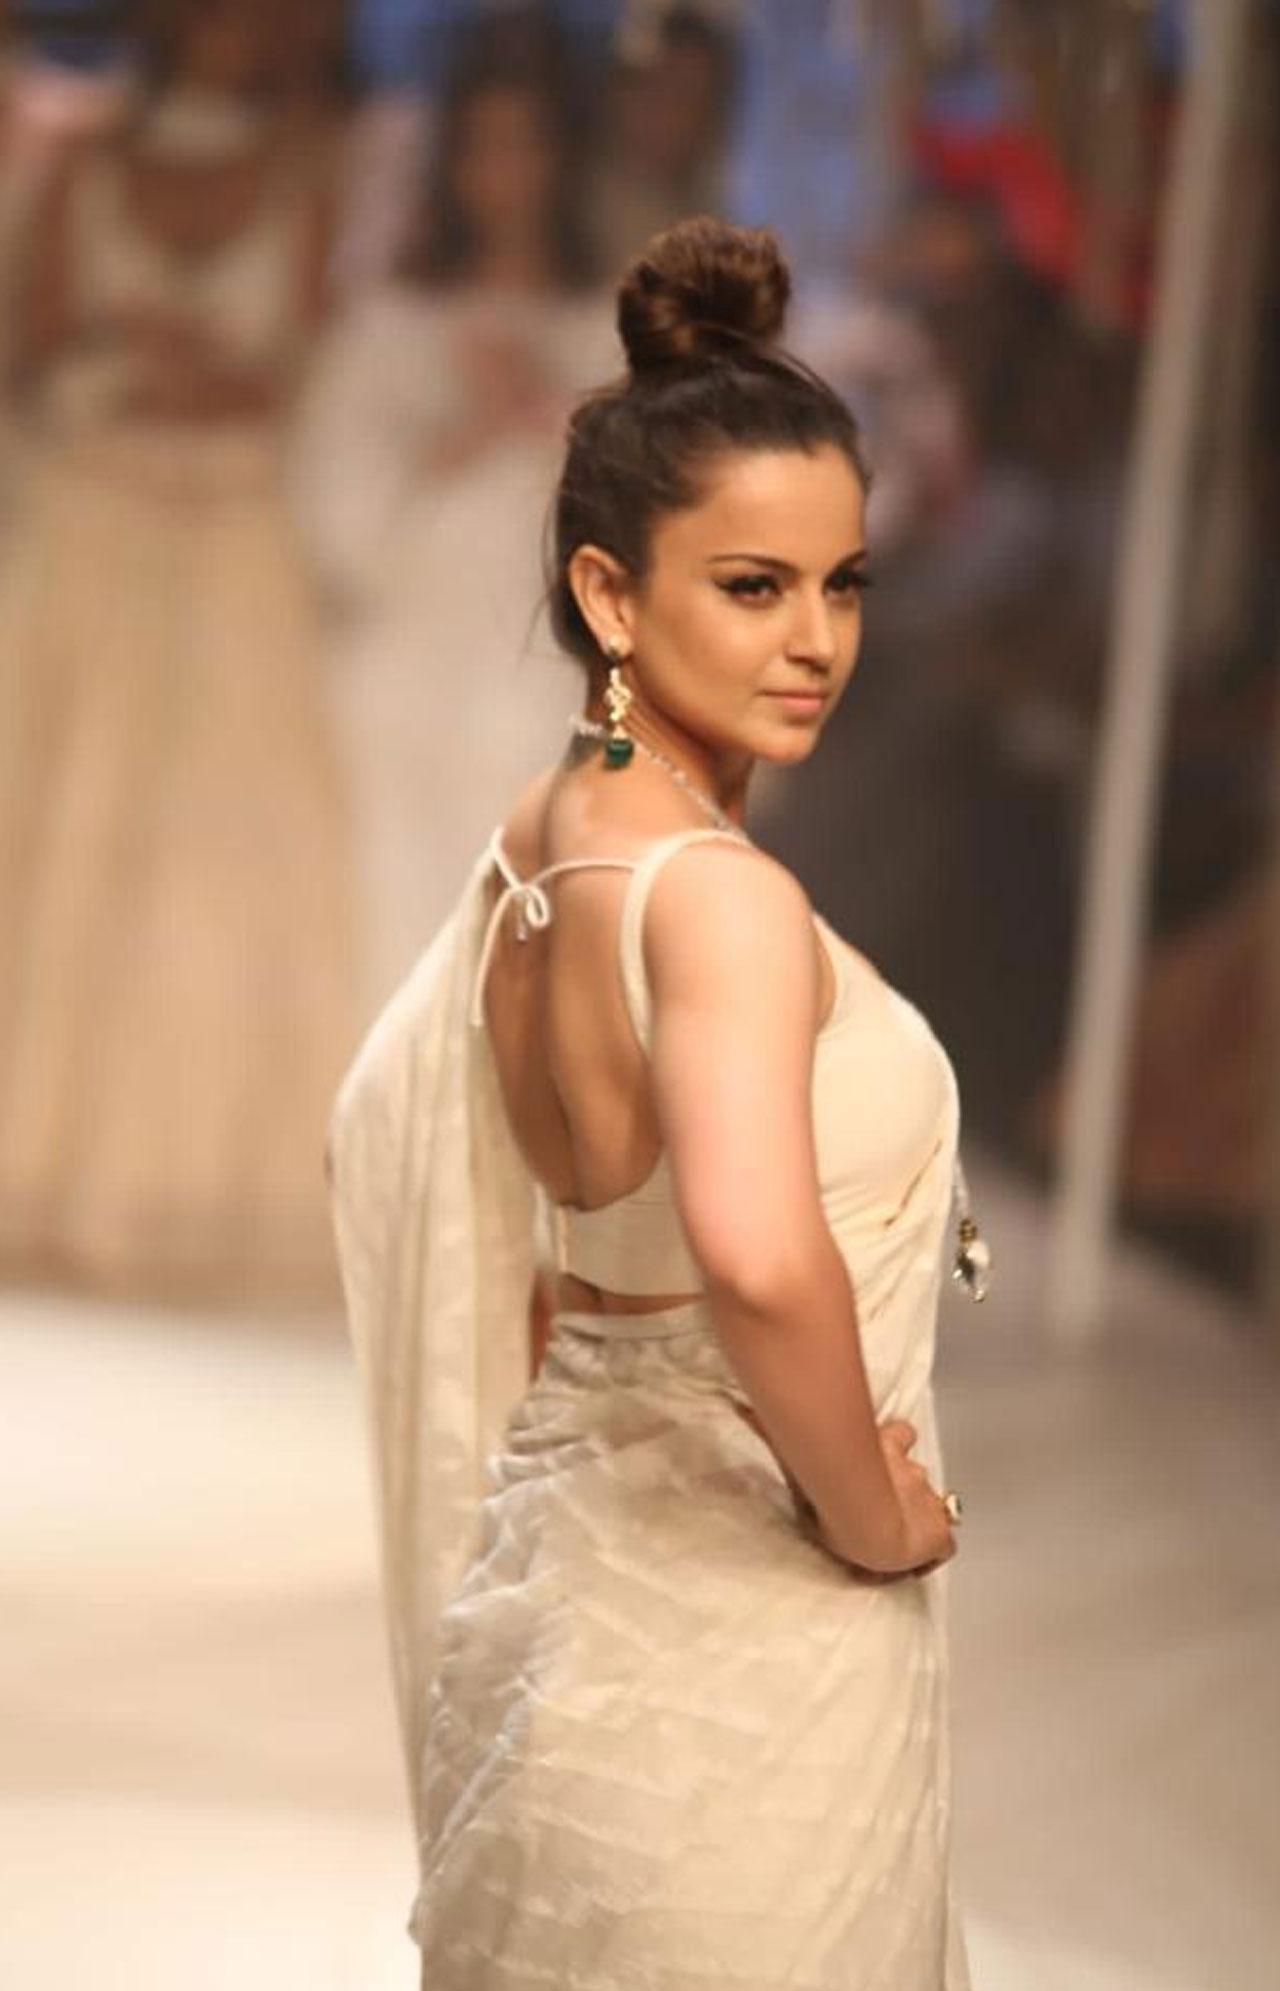 But Sanon, wasn't the only one we spotted at the event, Kangana Ranaut a champion of Handlooms and textiles made an appearance on Day 2 which celebrated sustainable fashion. Ranaut, who walked for Khadi, is delighted that more and more people are turning to Indian textiles and is happy that people are seeking a more organic lifestyle, sustainable fabrics and environment friendly fashion.